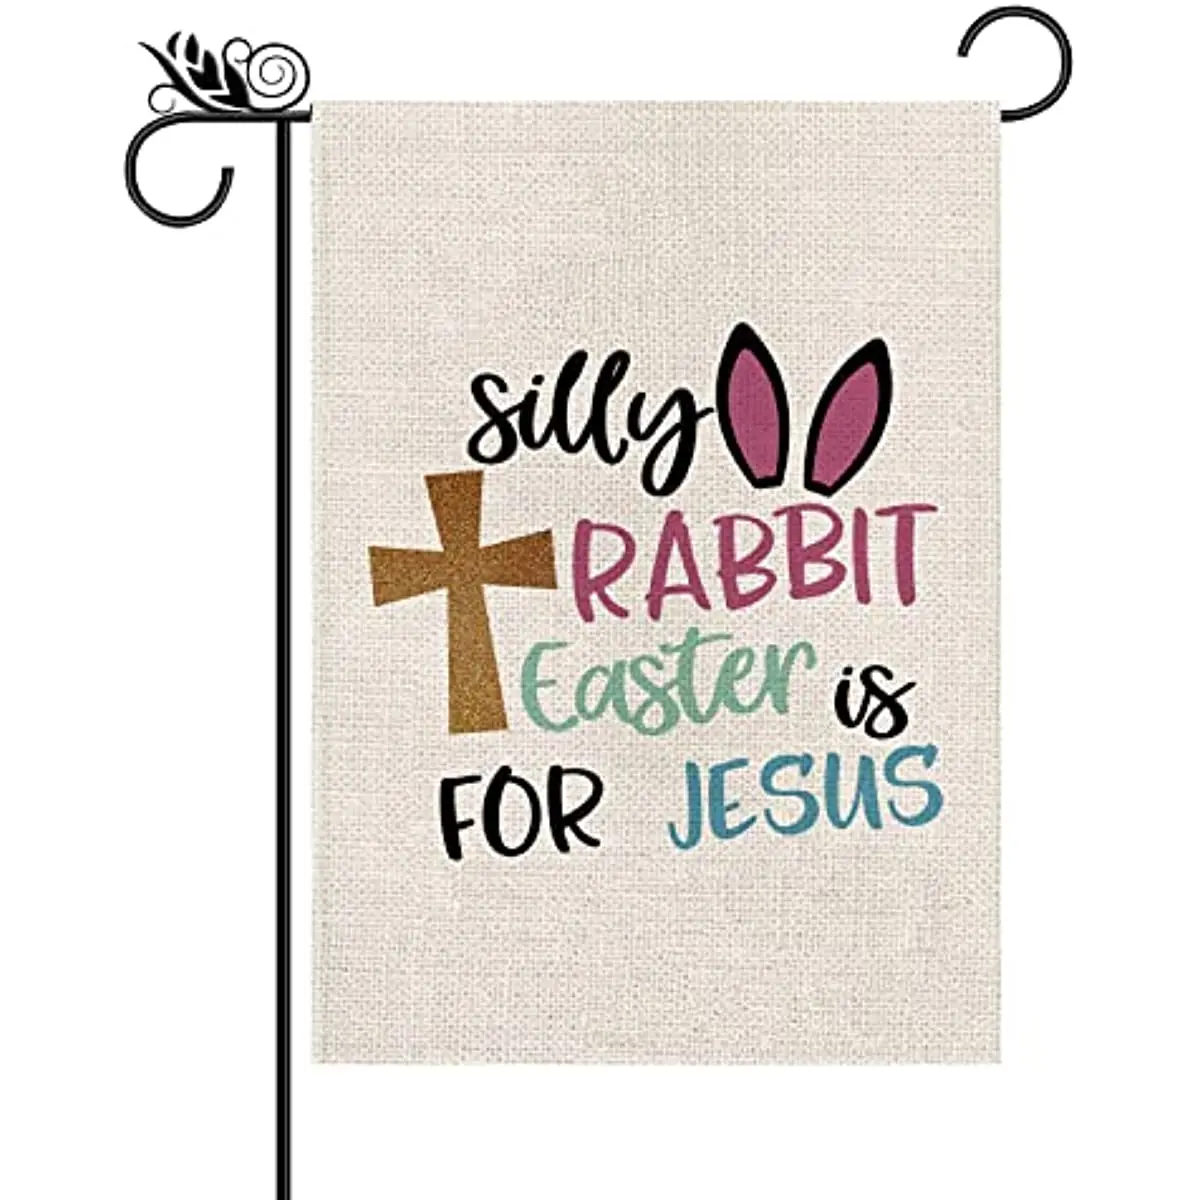 

New Easter Garden Flag 12x18 Inch Silly Rabbit Easter is for Jesus Vertical Double Sided Holiday Yard Outdoor Decor